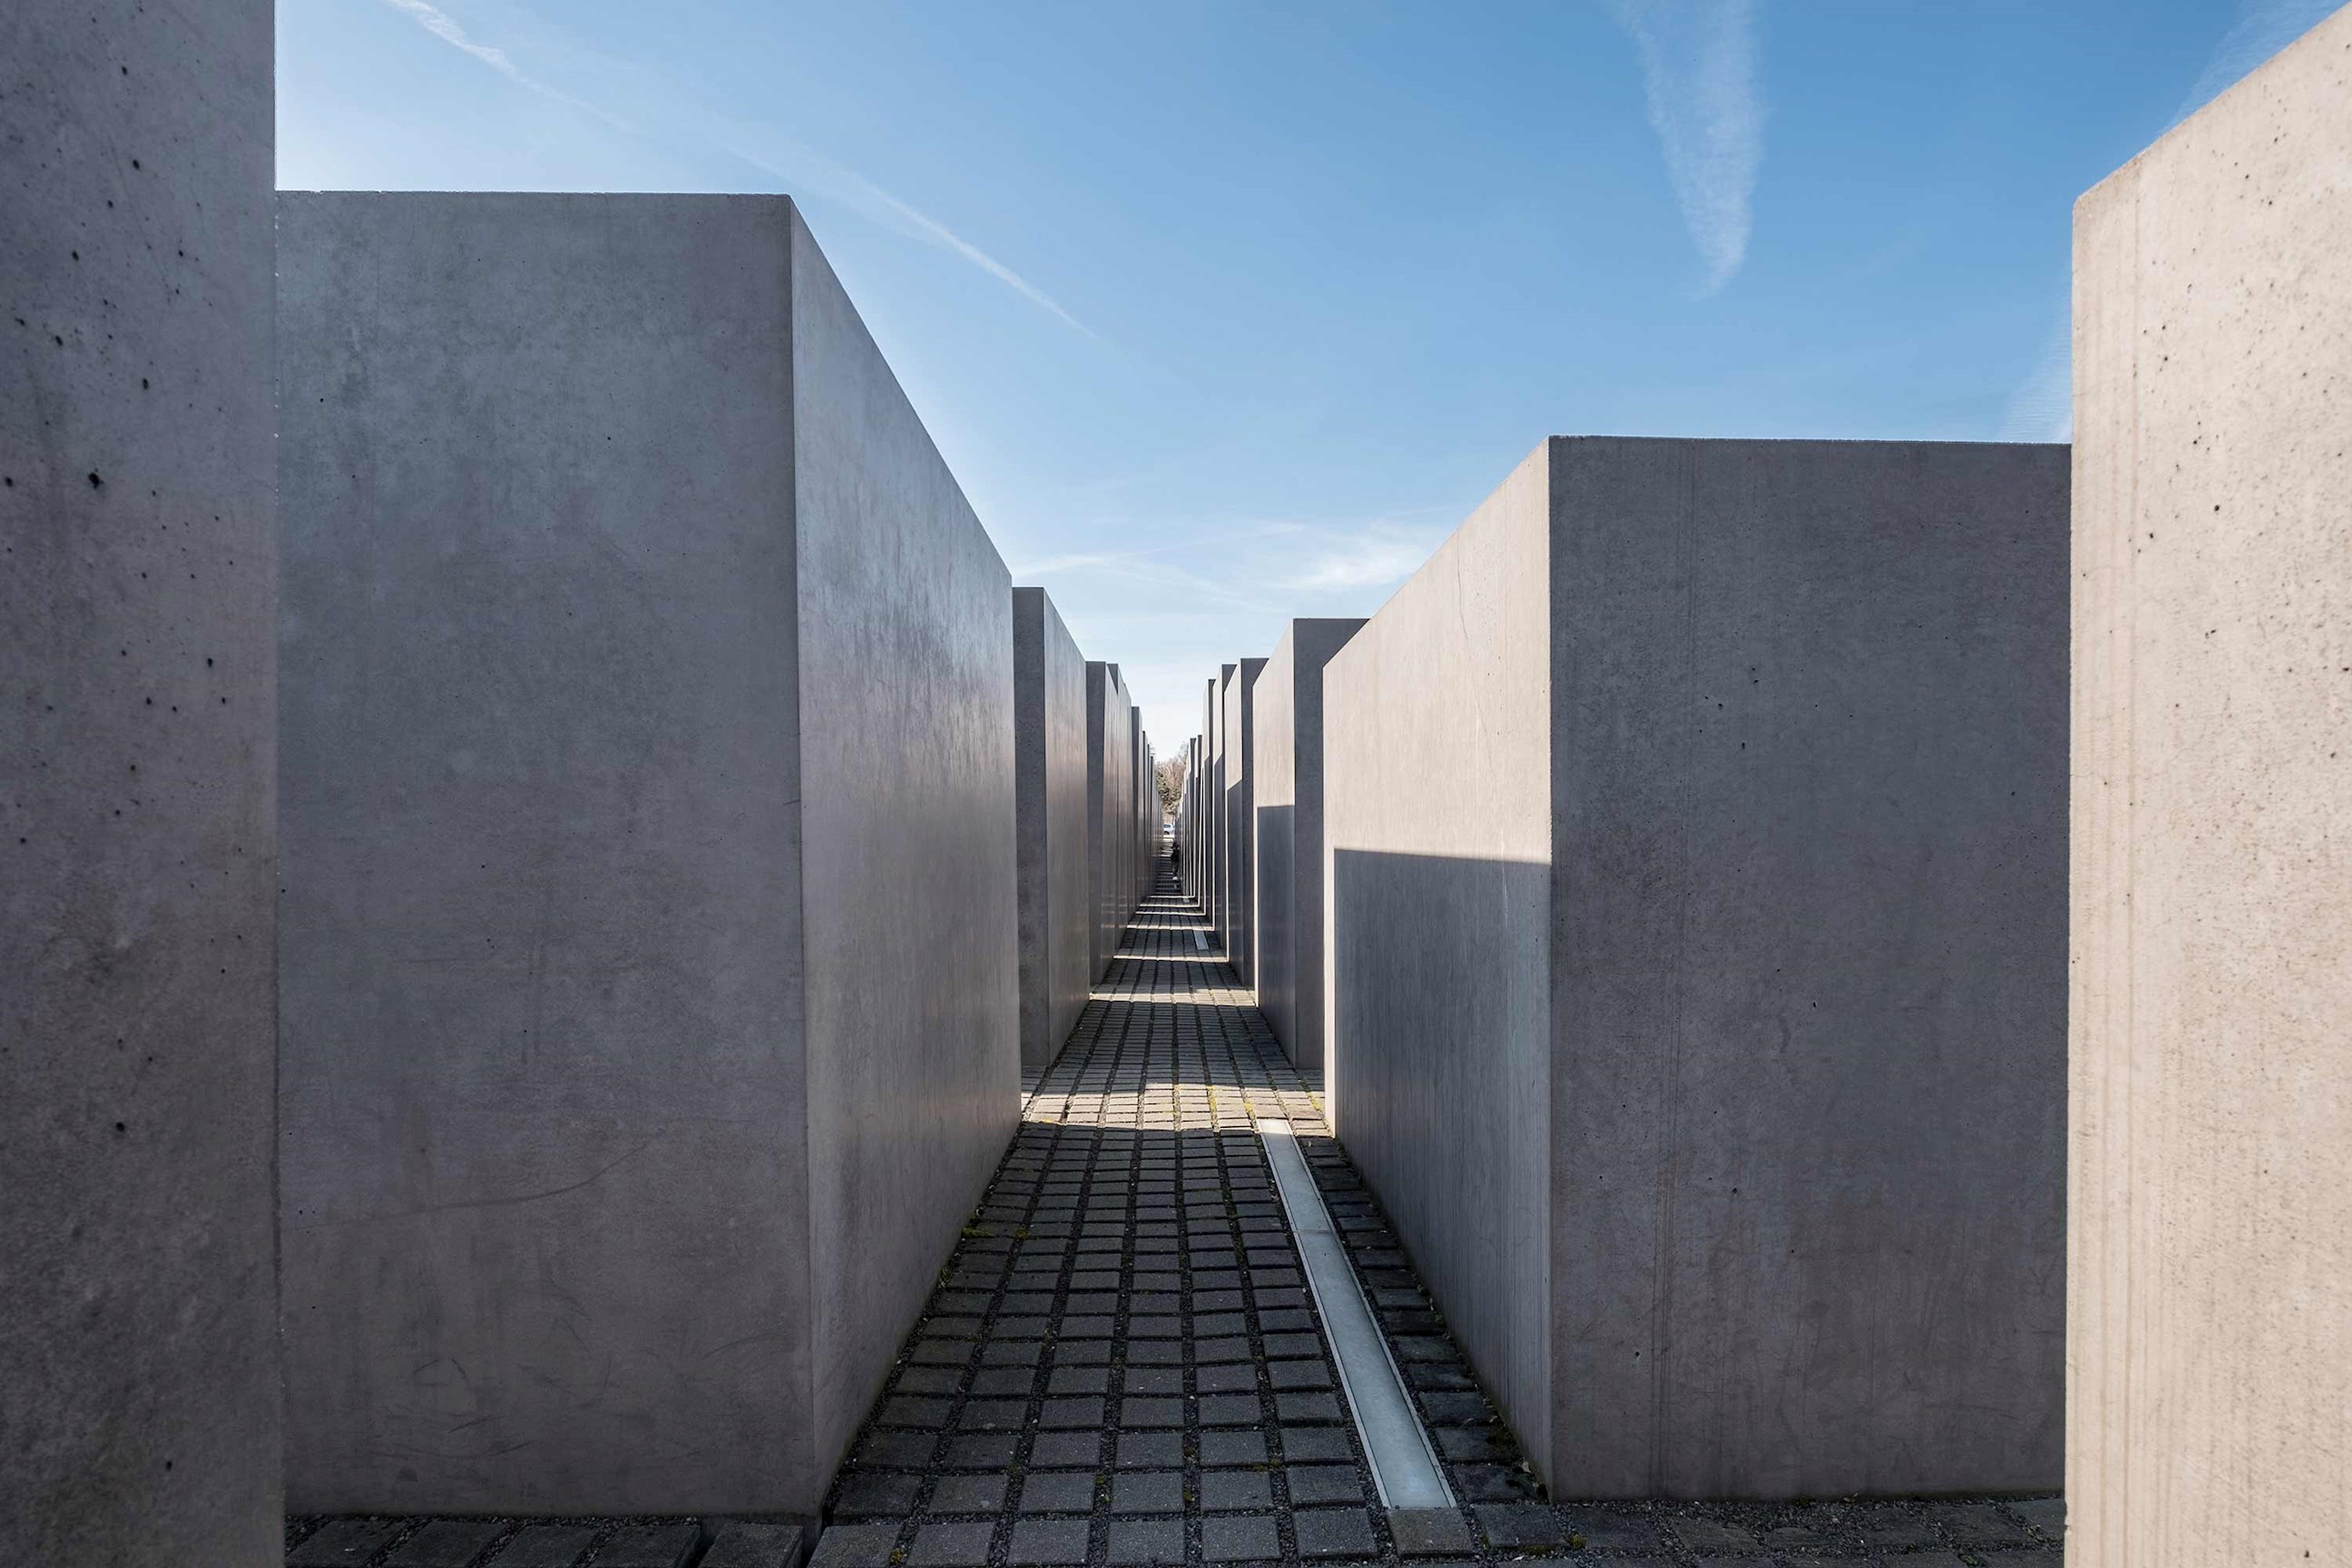 View the Holocaust Memorial, the Berlin Wall and Checkpoint Charlie in Berlin